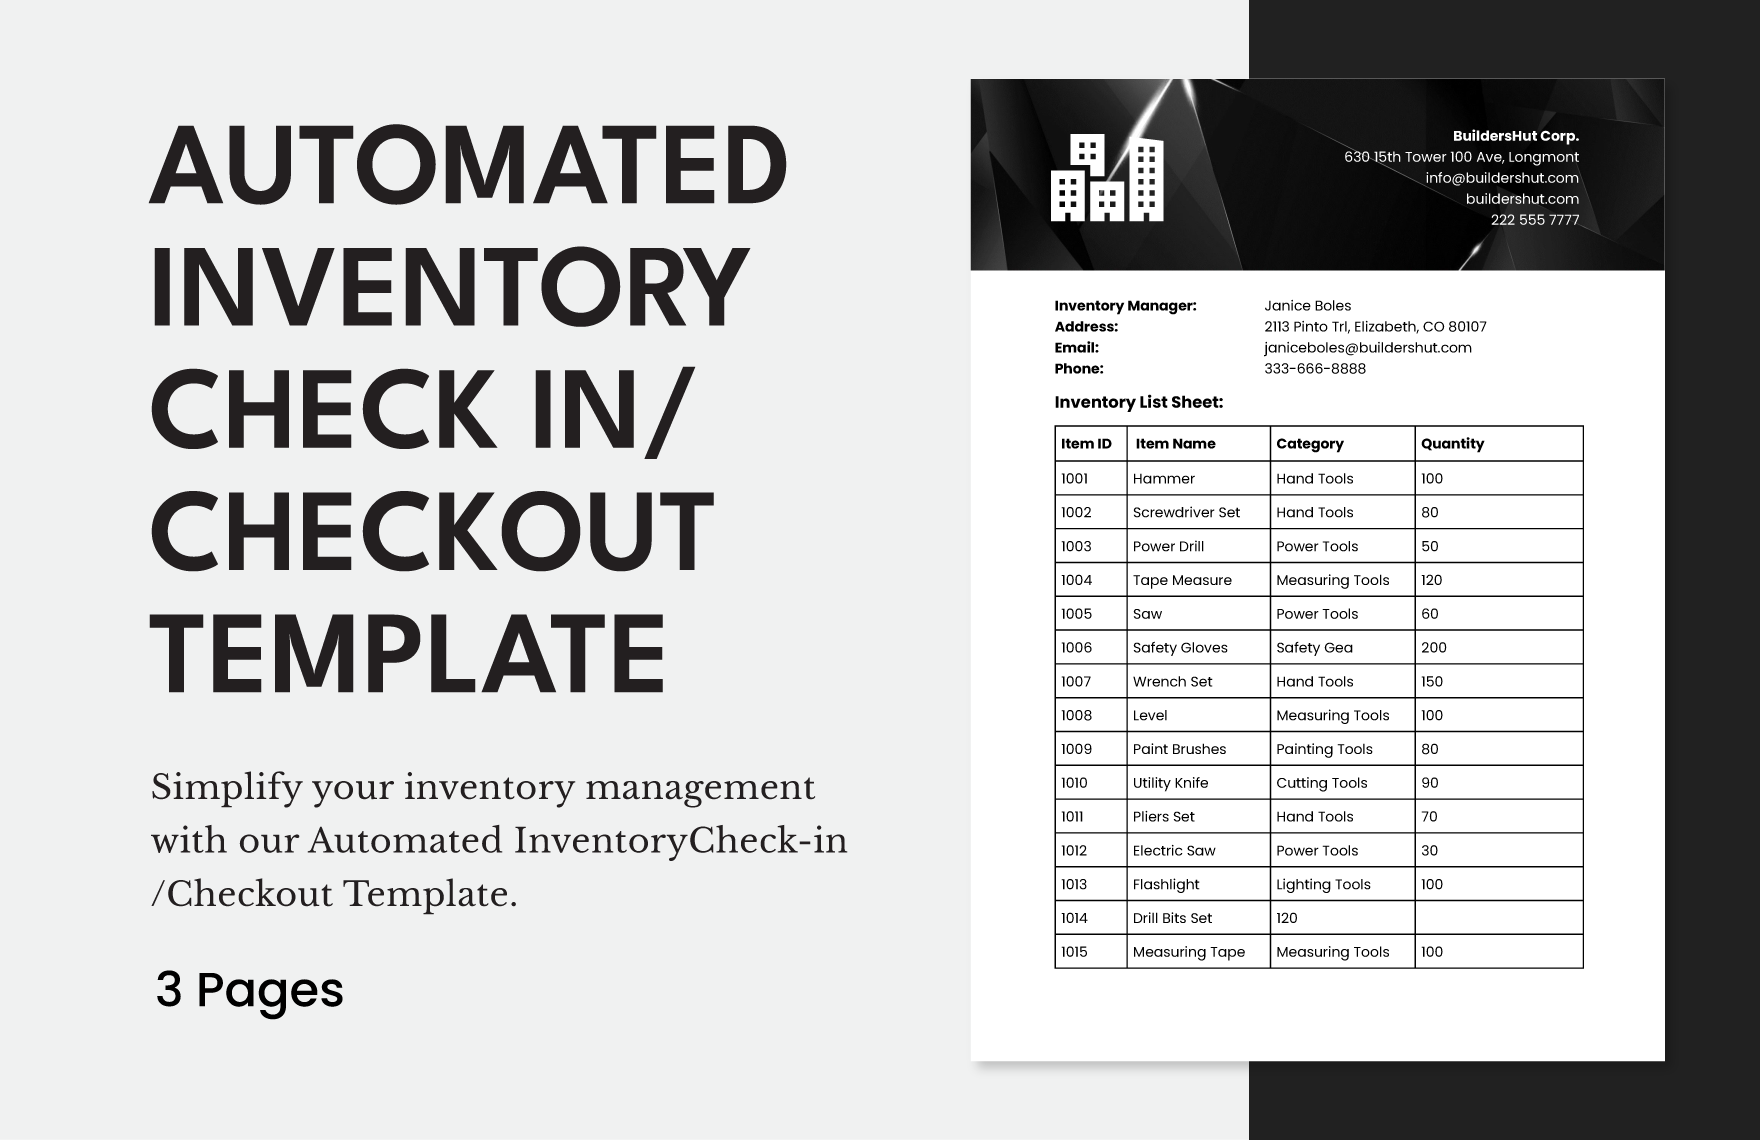 Automated Inventory Check in/ Checkout Template